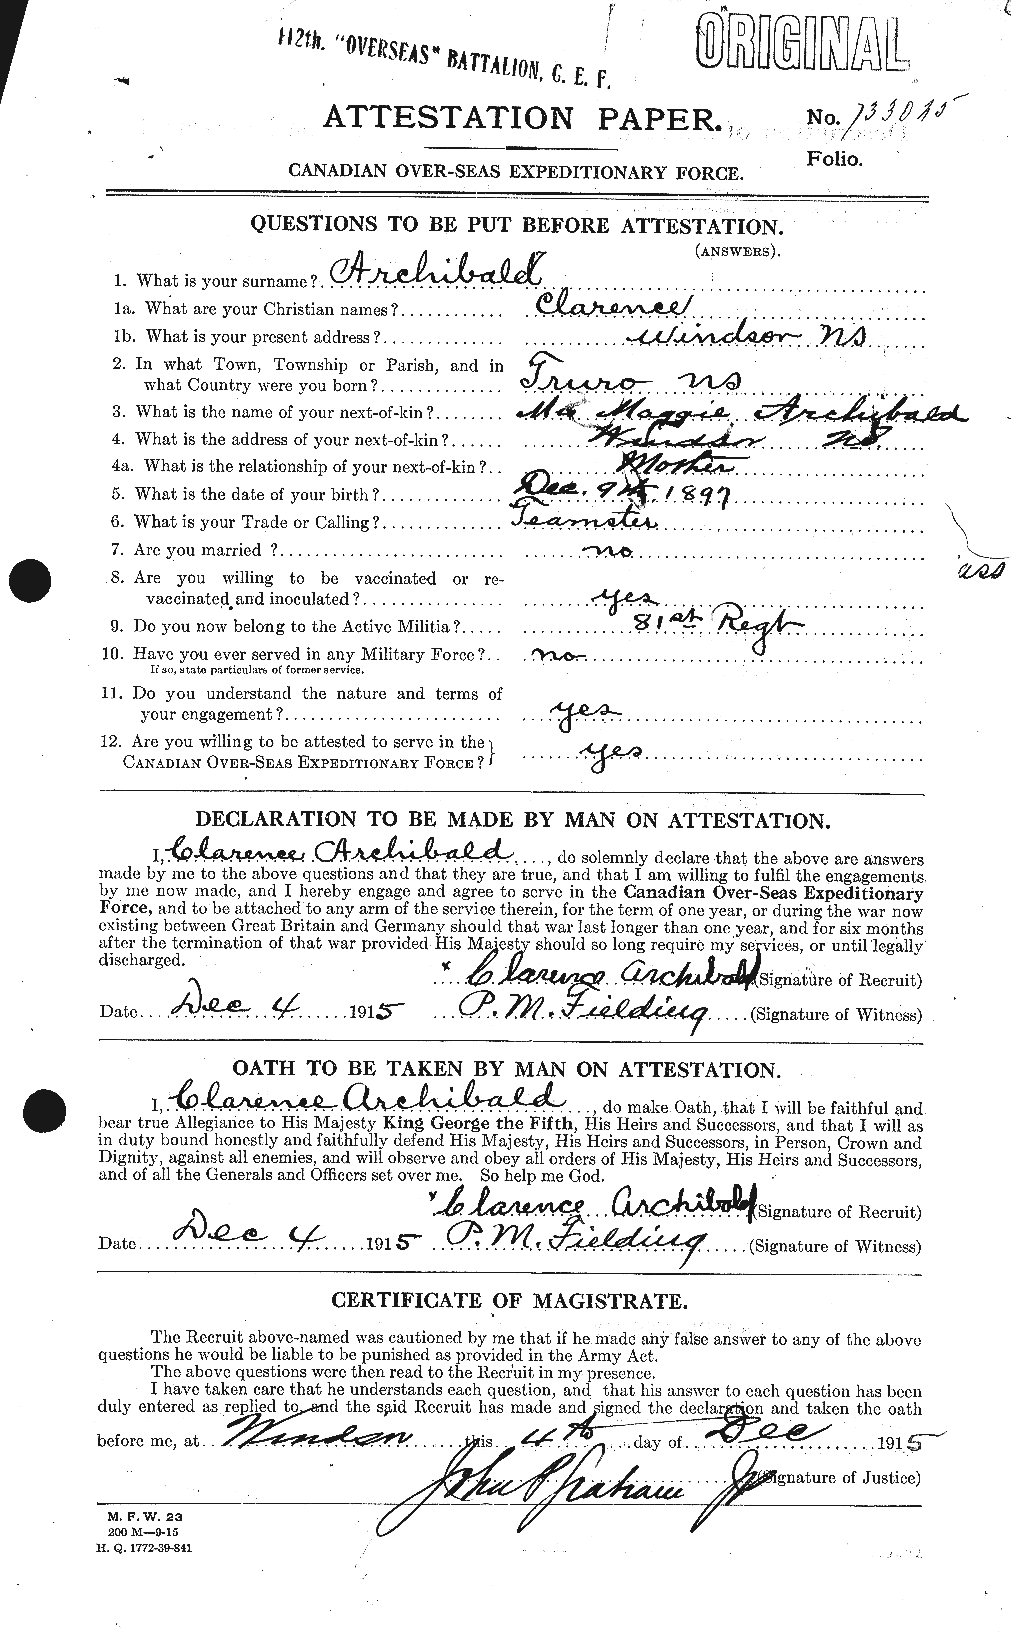 Personnel Records of the First World War - CEF 211640a